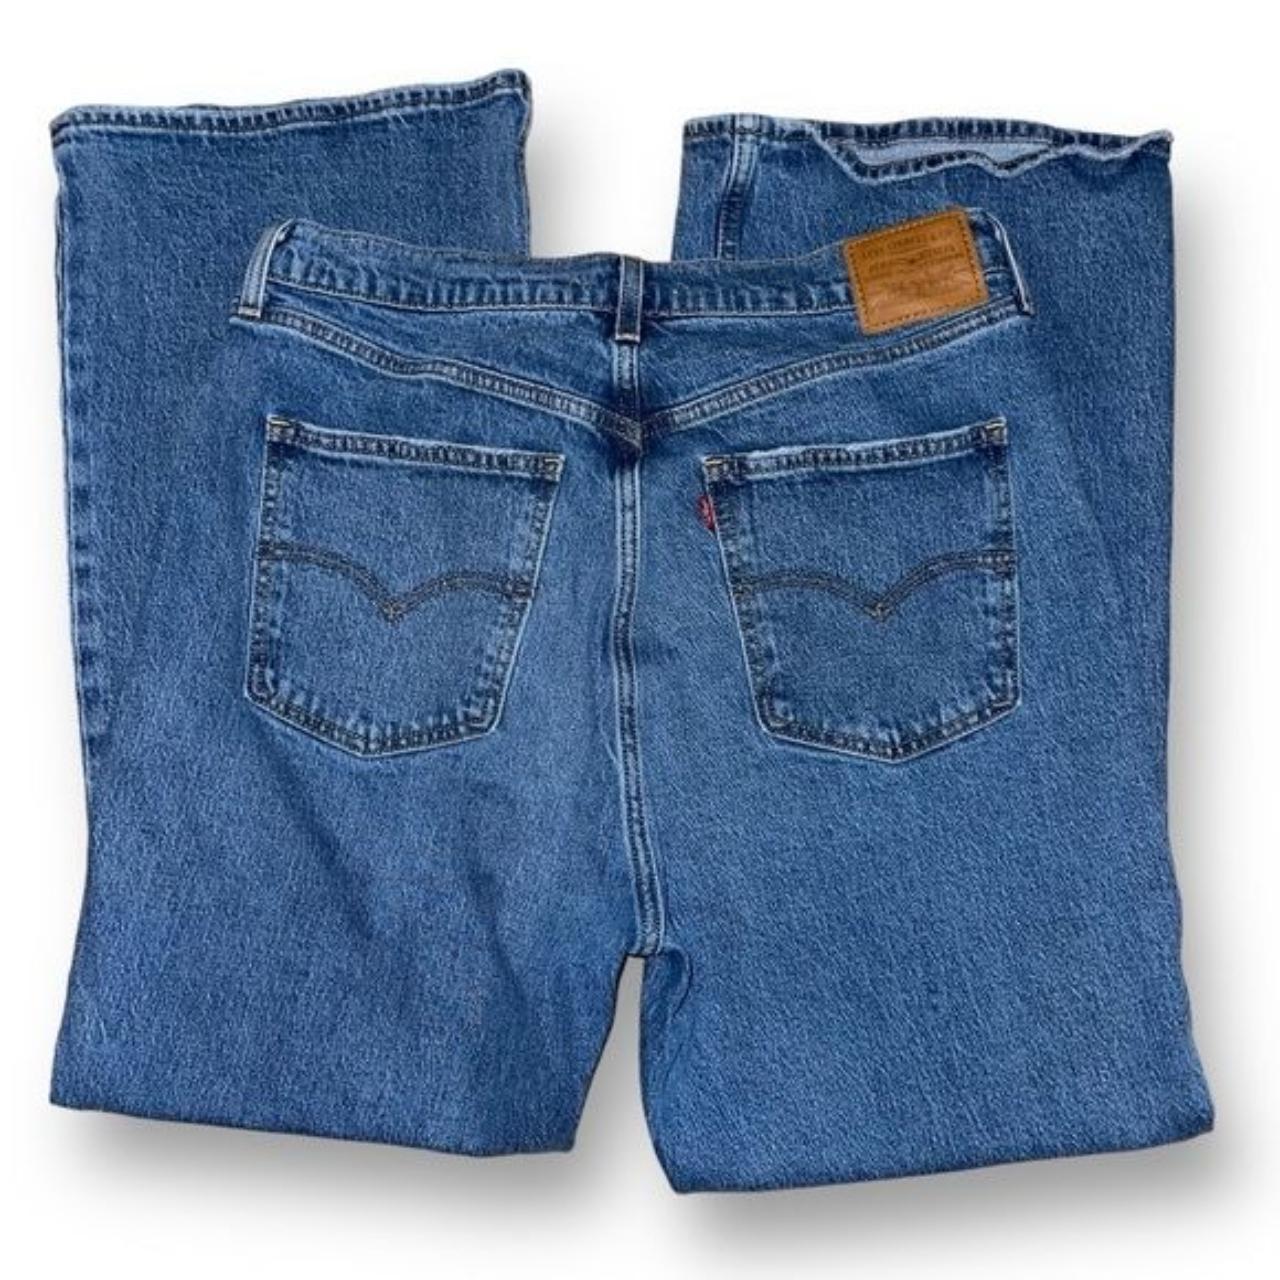 70s High Flare Jeans by Levi's for $30